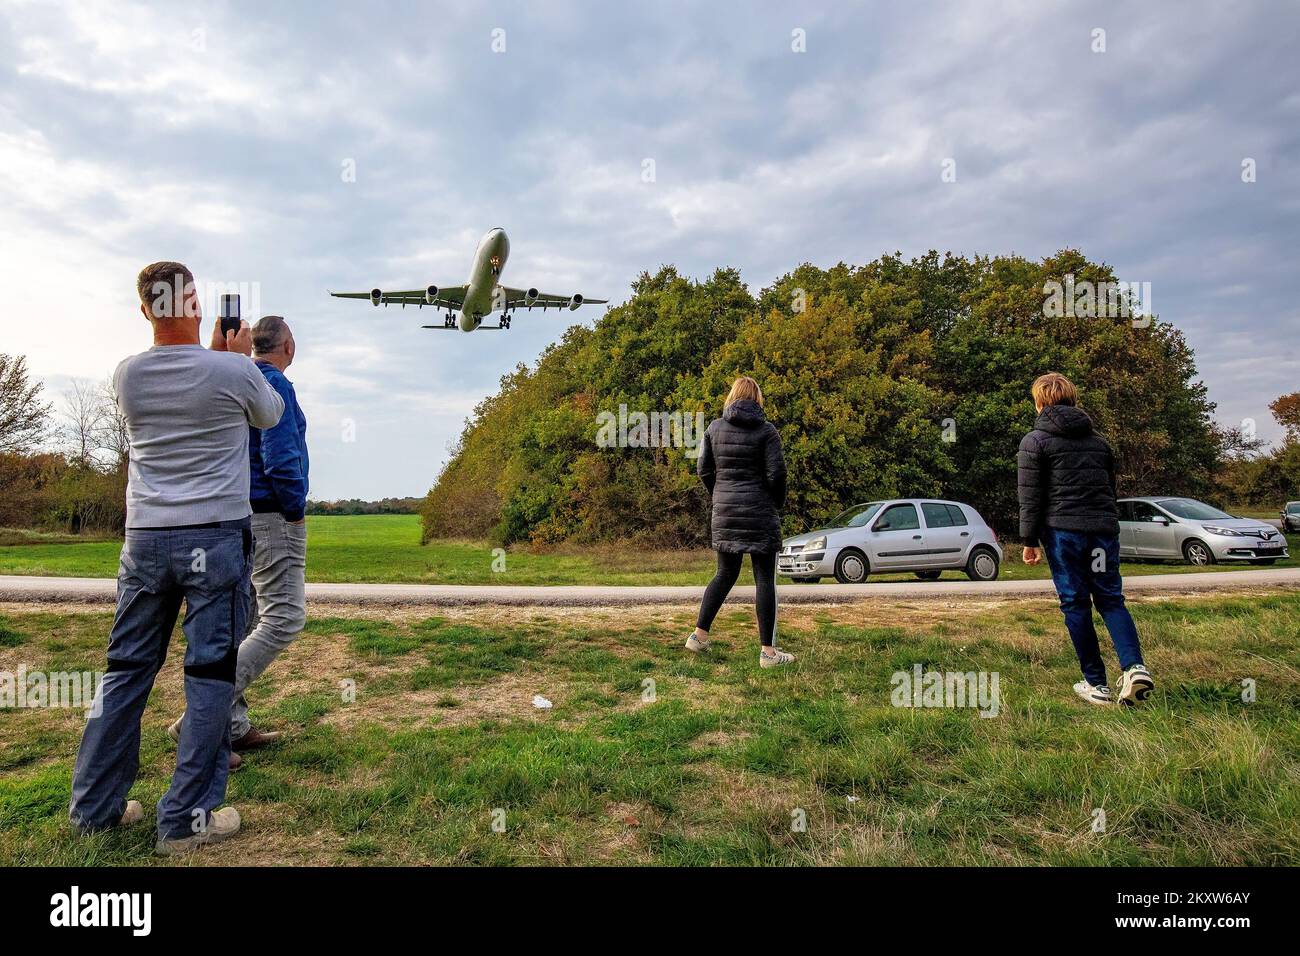 Citizens are watching the plane take off in Pula, Croatia on Nov. 16, 2021. The company Swiss International Air Lines on the type of aircraft Airbus A343 these days over Pula performs the tasks of flying or retraining of professional pilots on this type of aircraft. At the end of the runway, curious people from Pula come mostly with children and enjoy the planes that fly a few tens of meters above their heads when landing, although due to the size of the plane, the flight seems lower. Photo: Srecko Niketic/PIXSELL Stock Photo